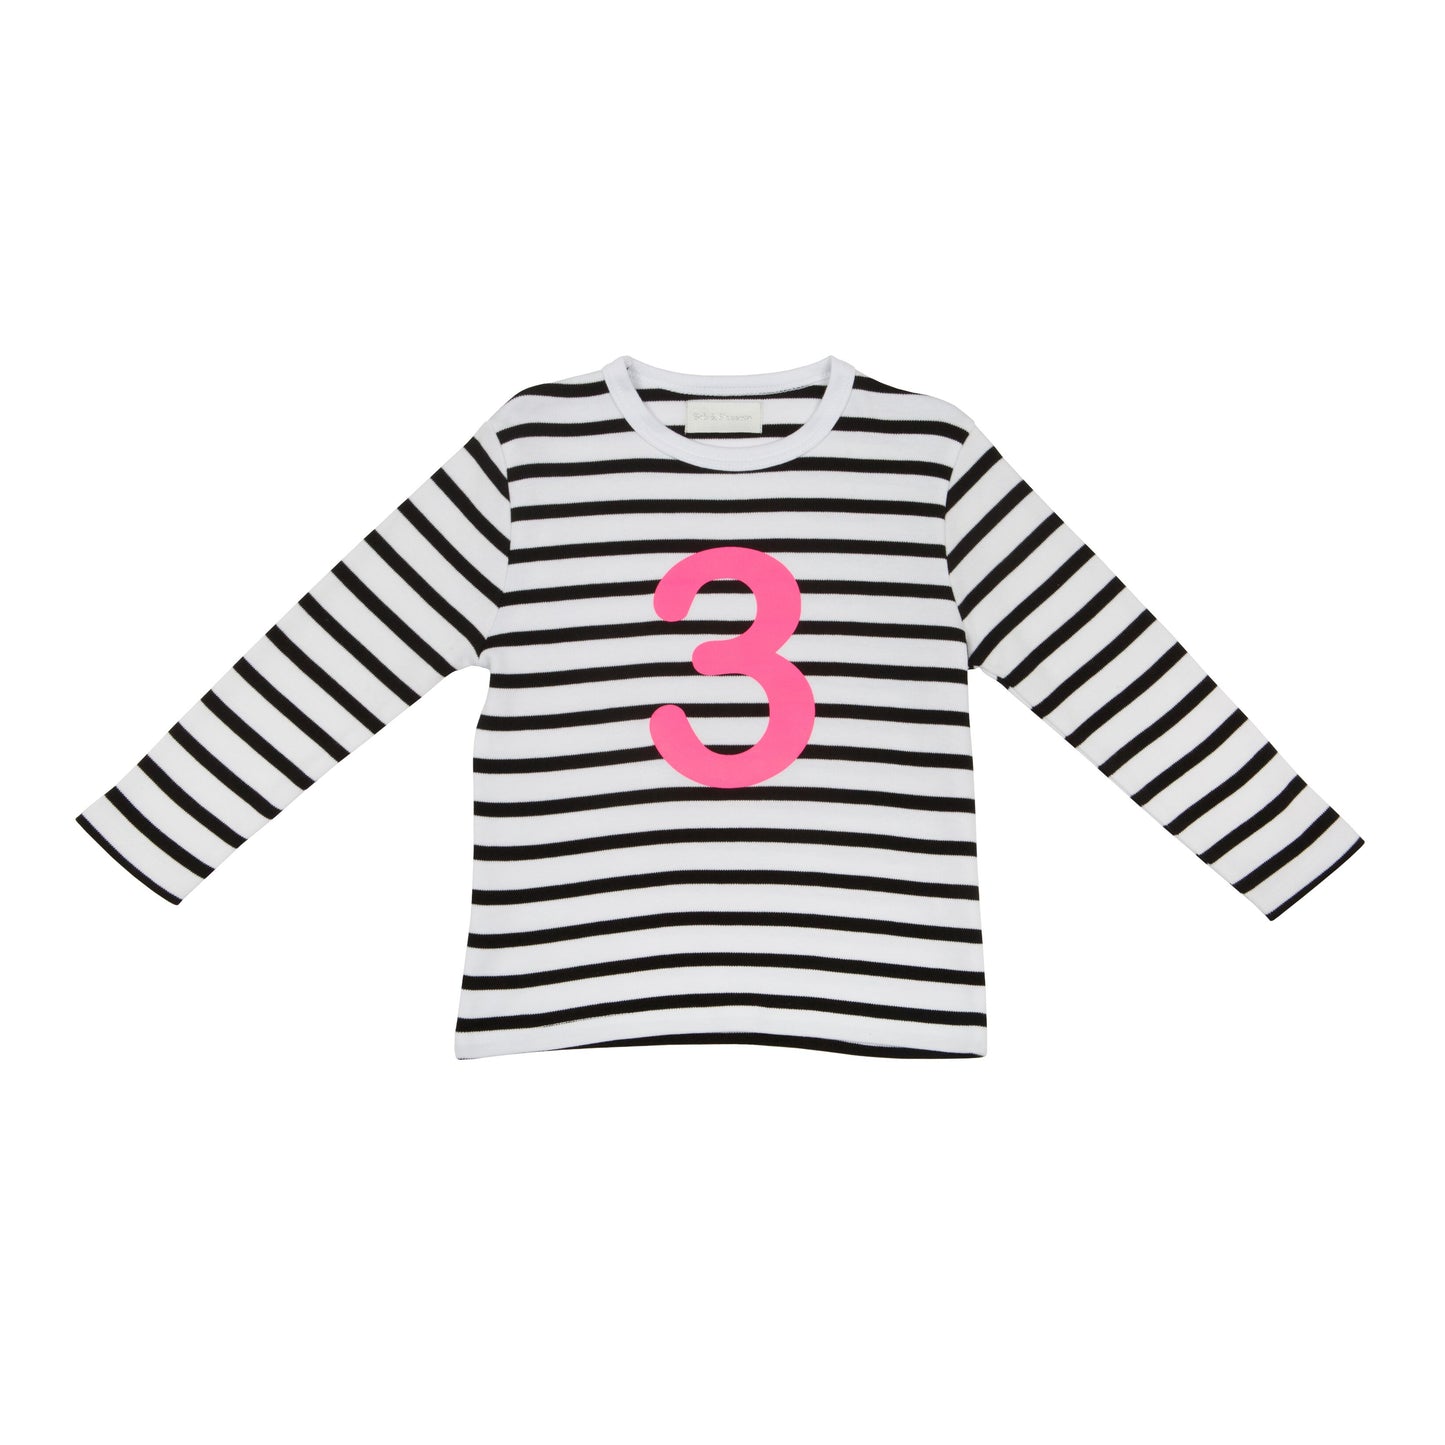 Bob & Blossom black and white striped long sleeved t shirt with hot pink number 3